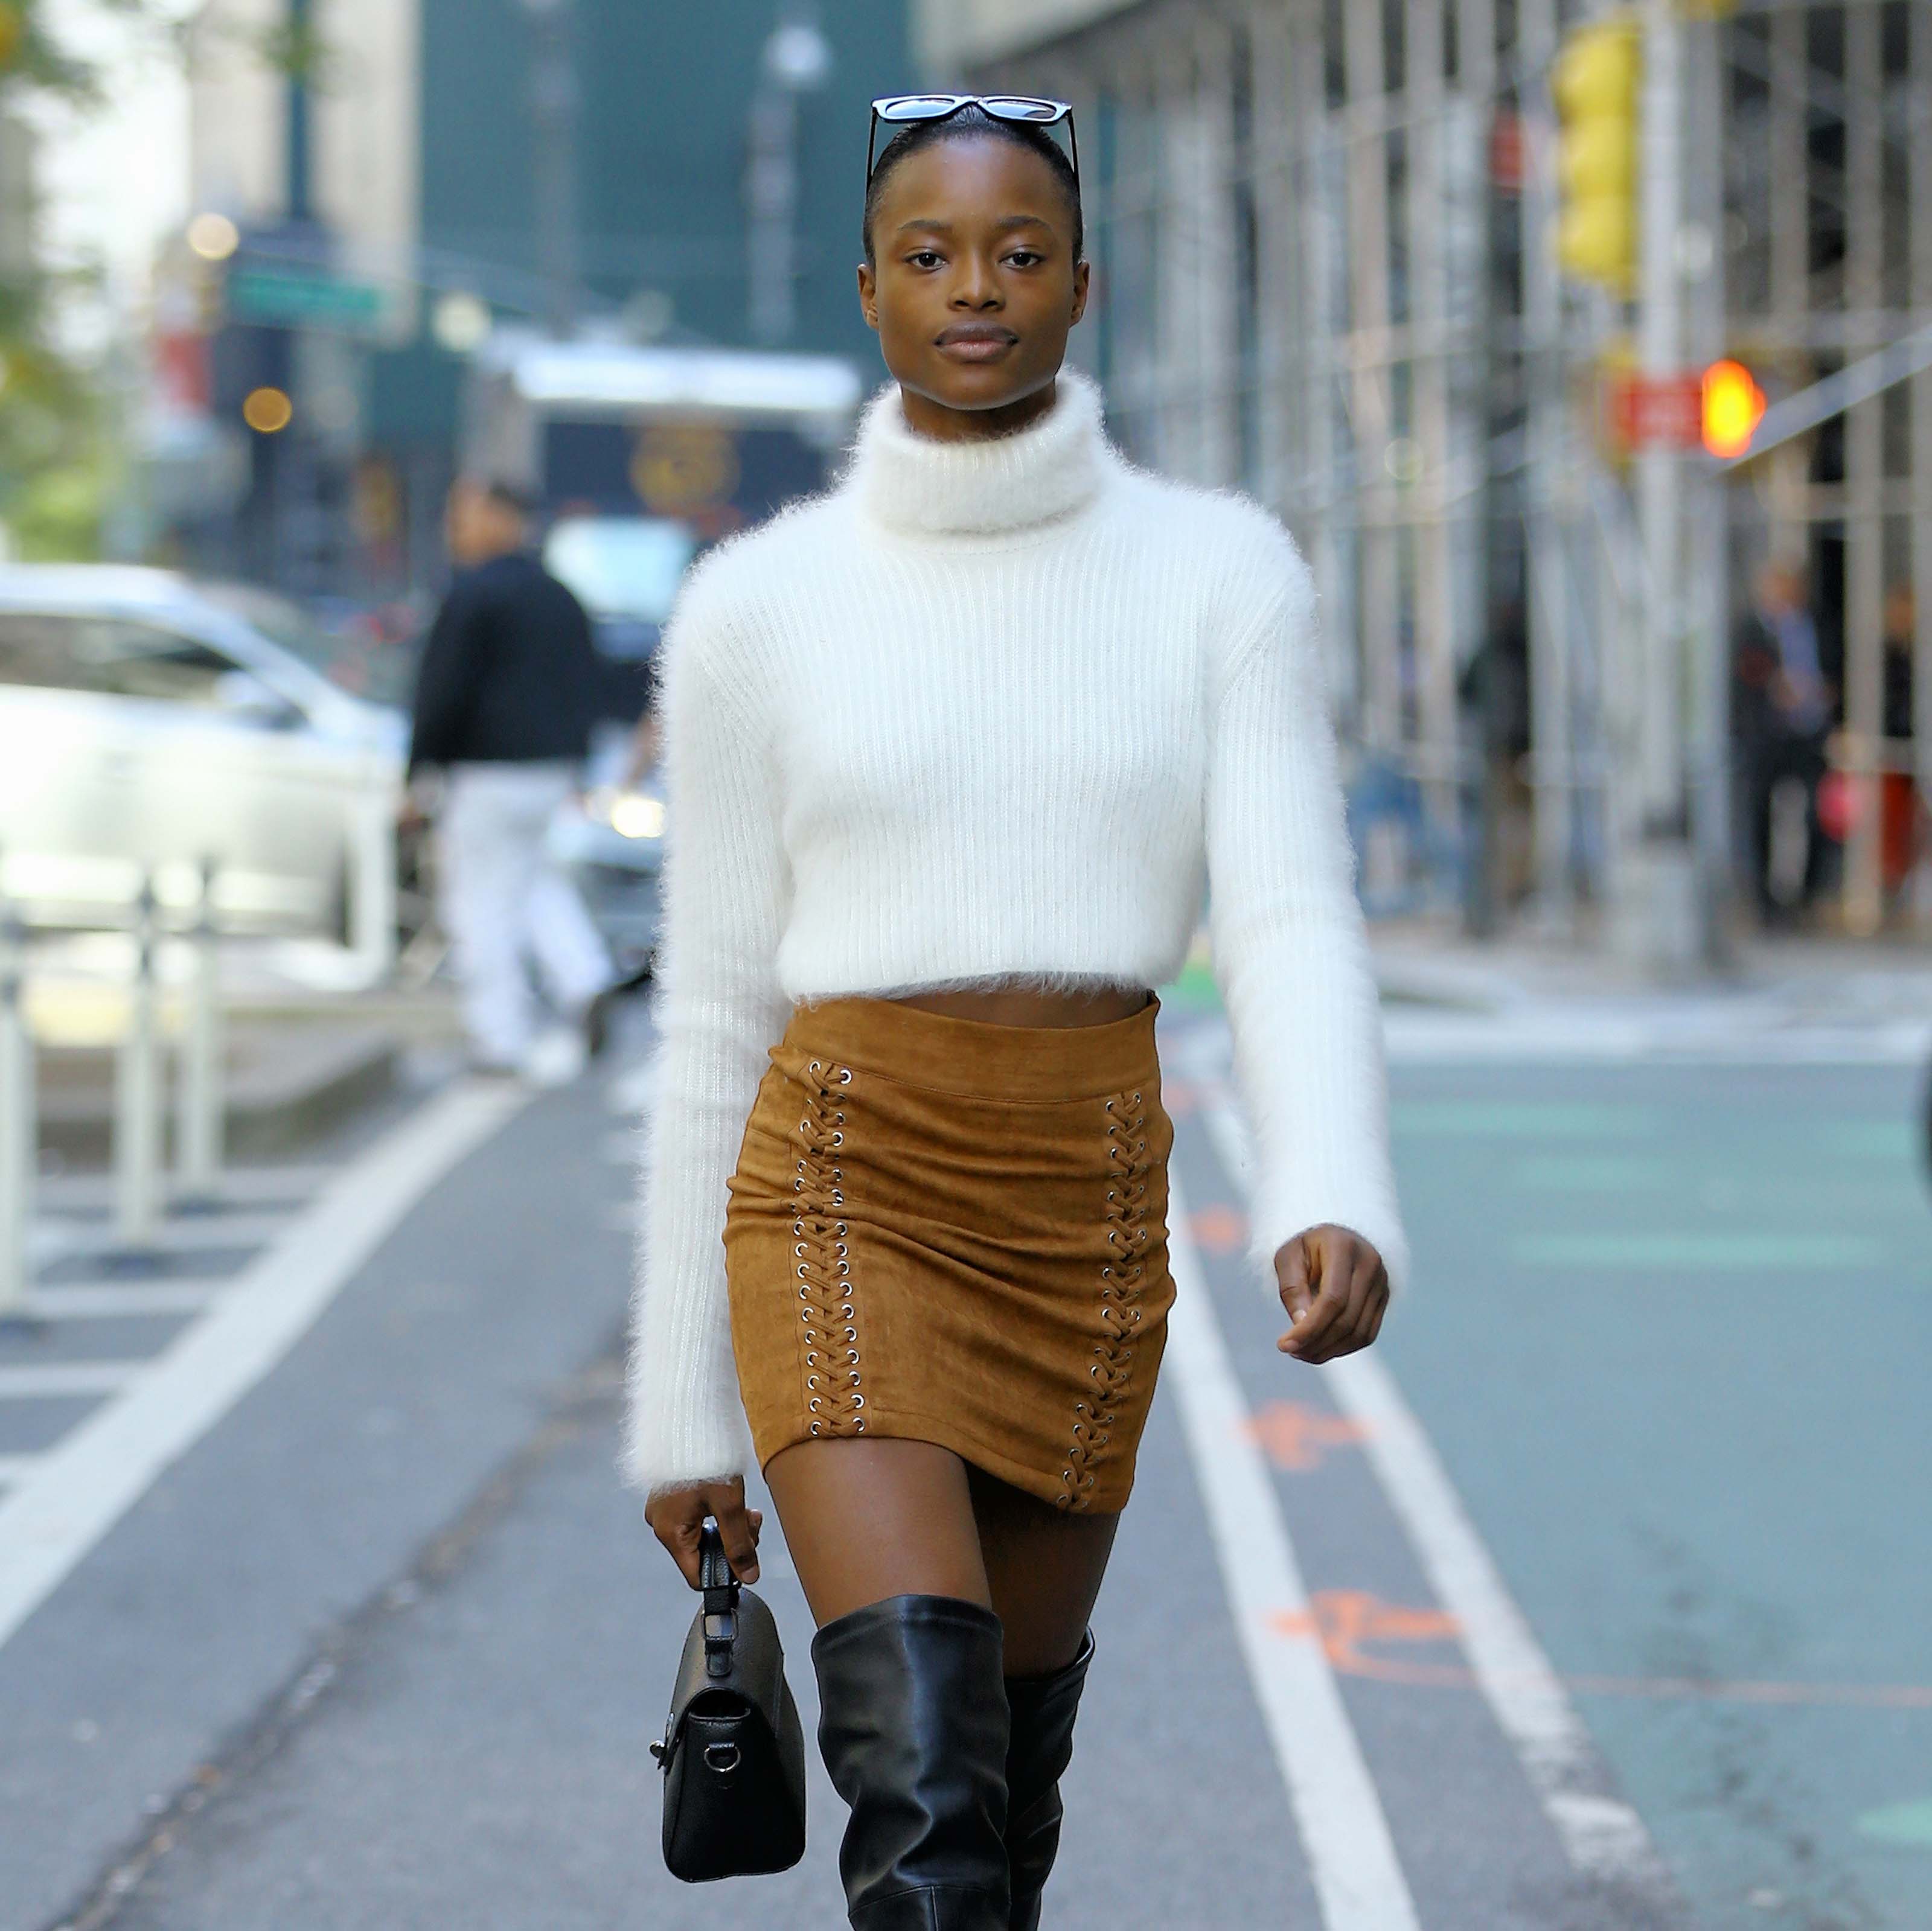 Mayowa Nicholas attends fittings for the 2018 Victoria’s Secret Fashion Show